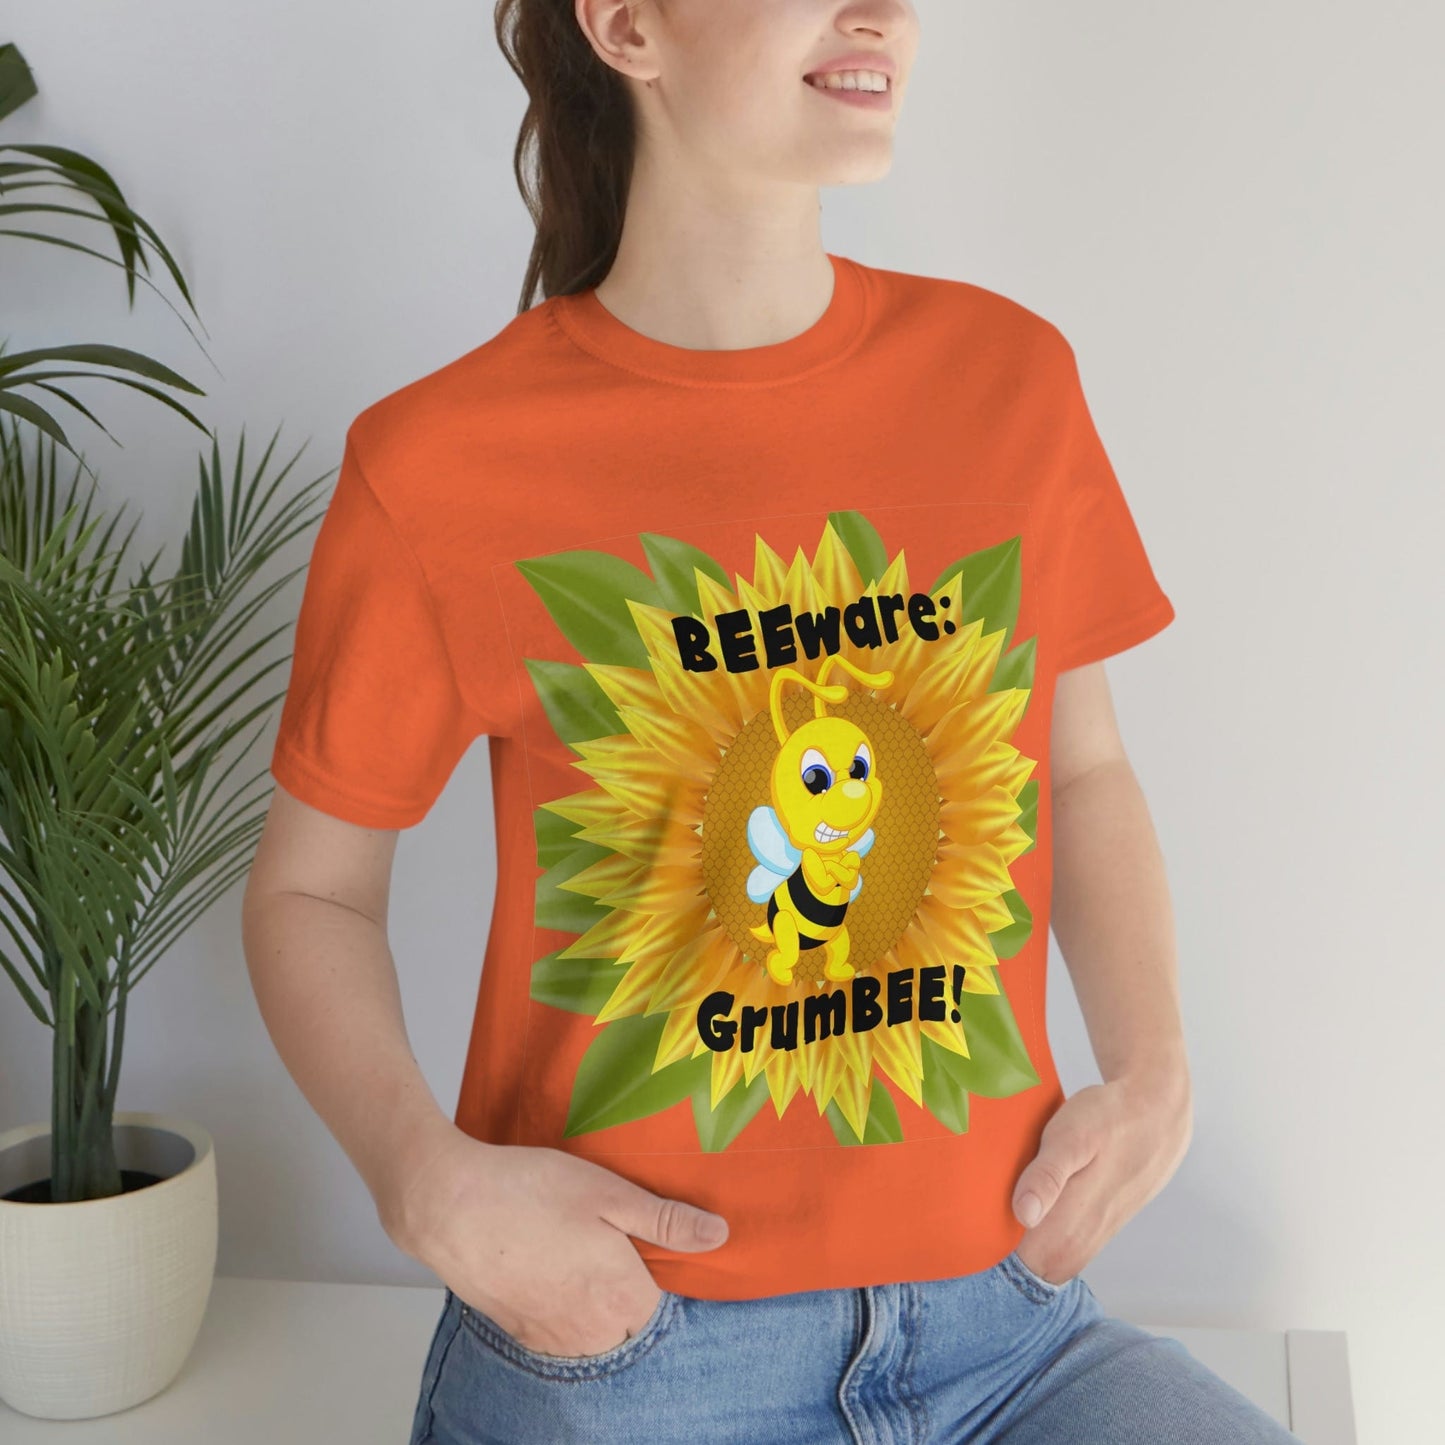 Bee Shirt, Witty Goofy Bee T Shirt, BEEware GrumBEE Sarcastic Silly Shirt, Kawaii Best Selling Shirts, Cool Soft Bella Canvas Graphic Tee